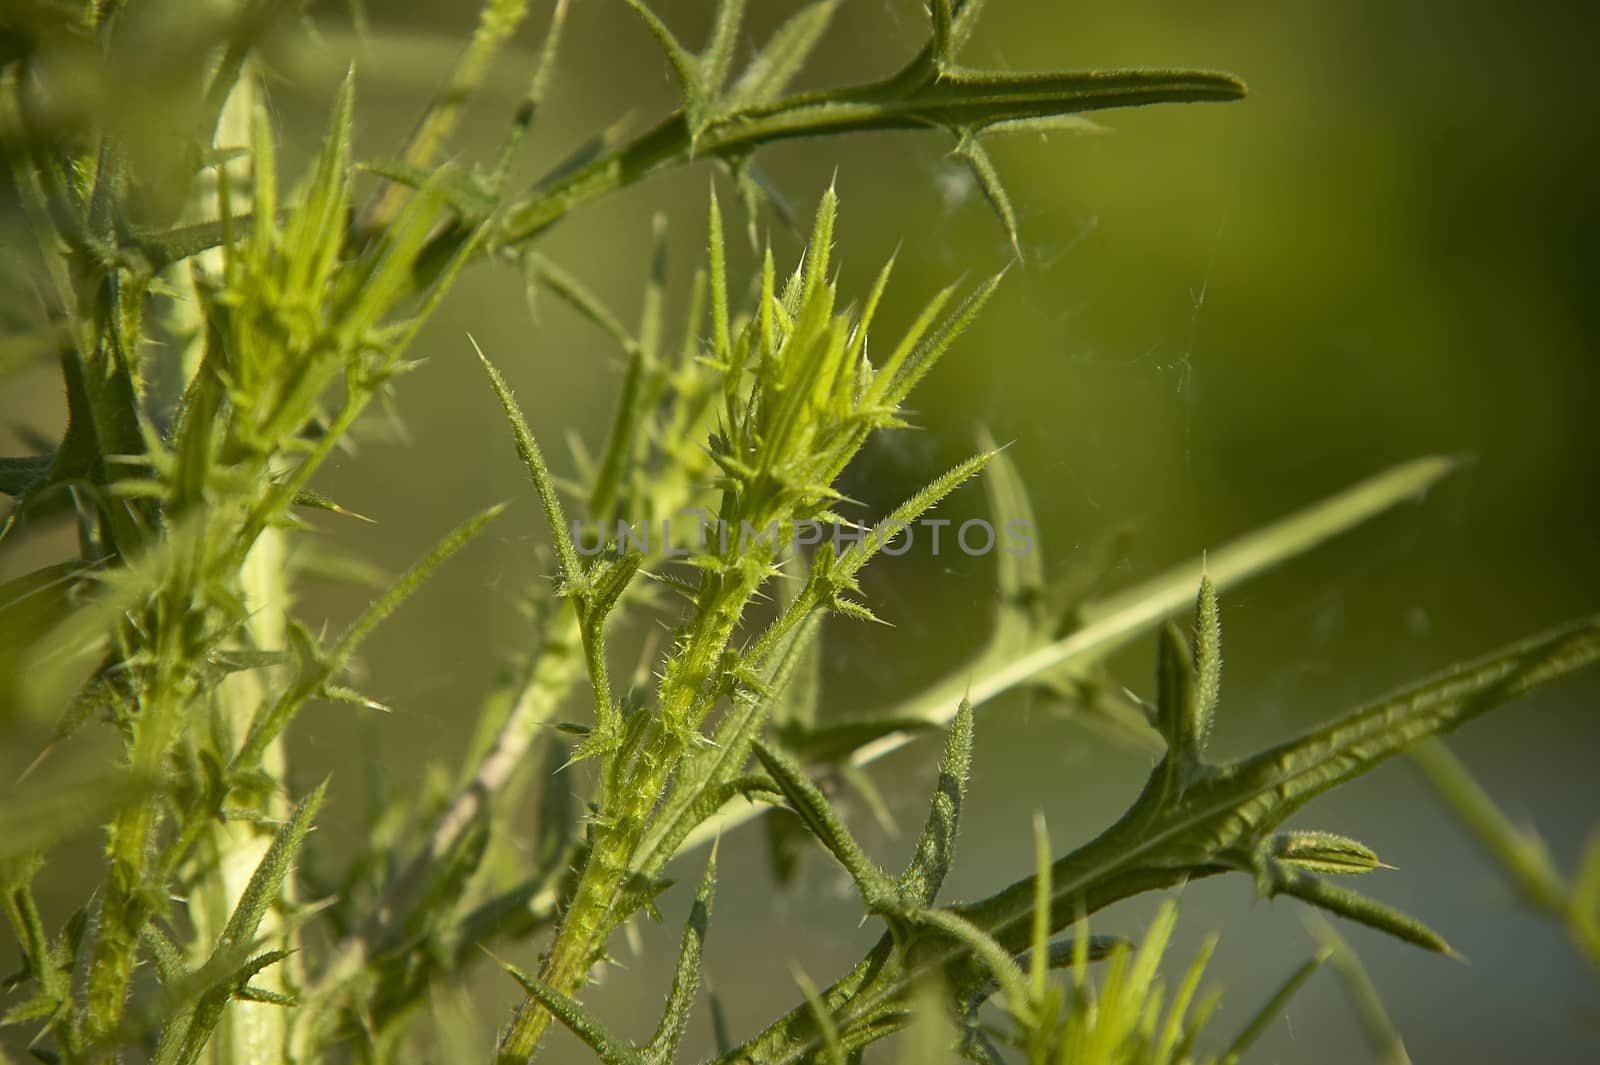 Small detail of a nasty, pungent and poisonous grass that grows in some northern Italian countryside.